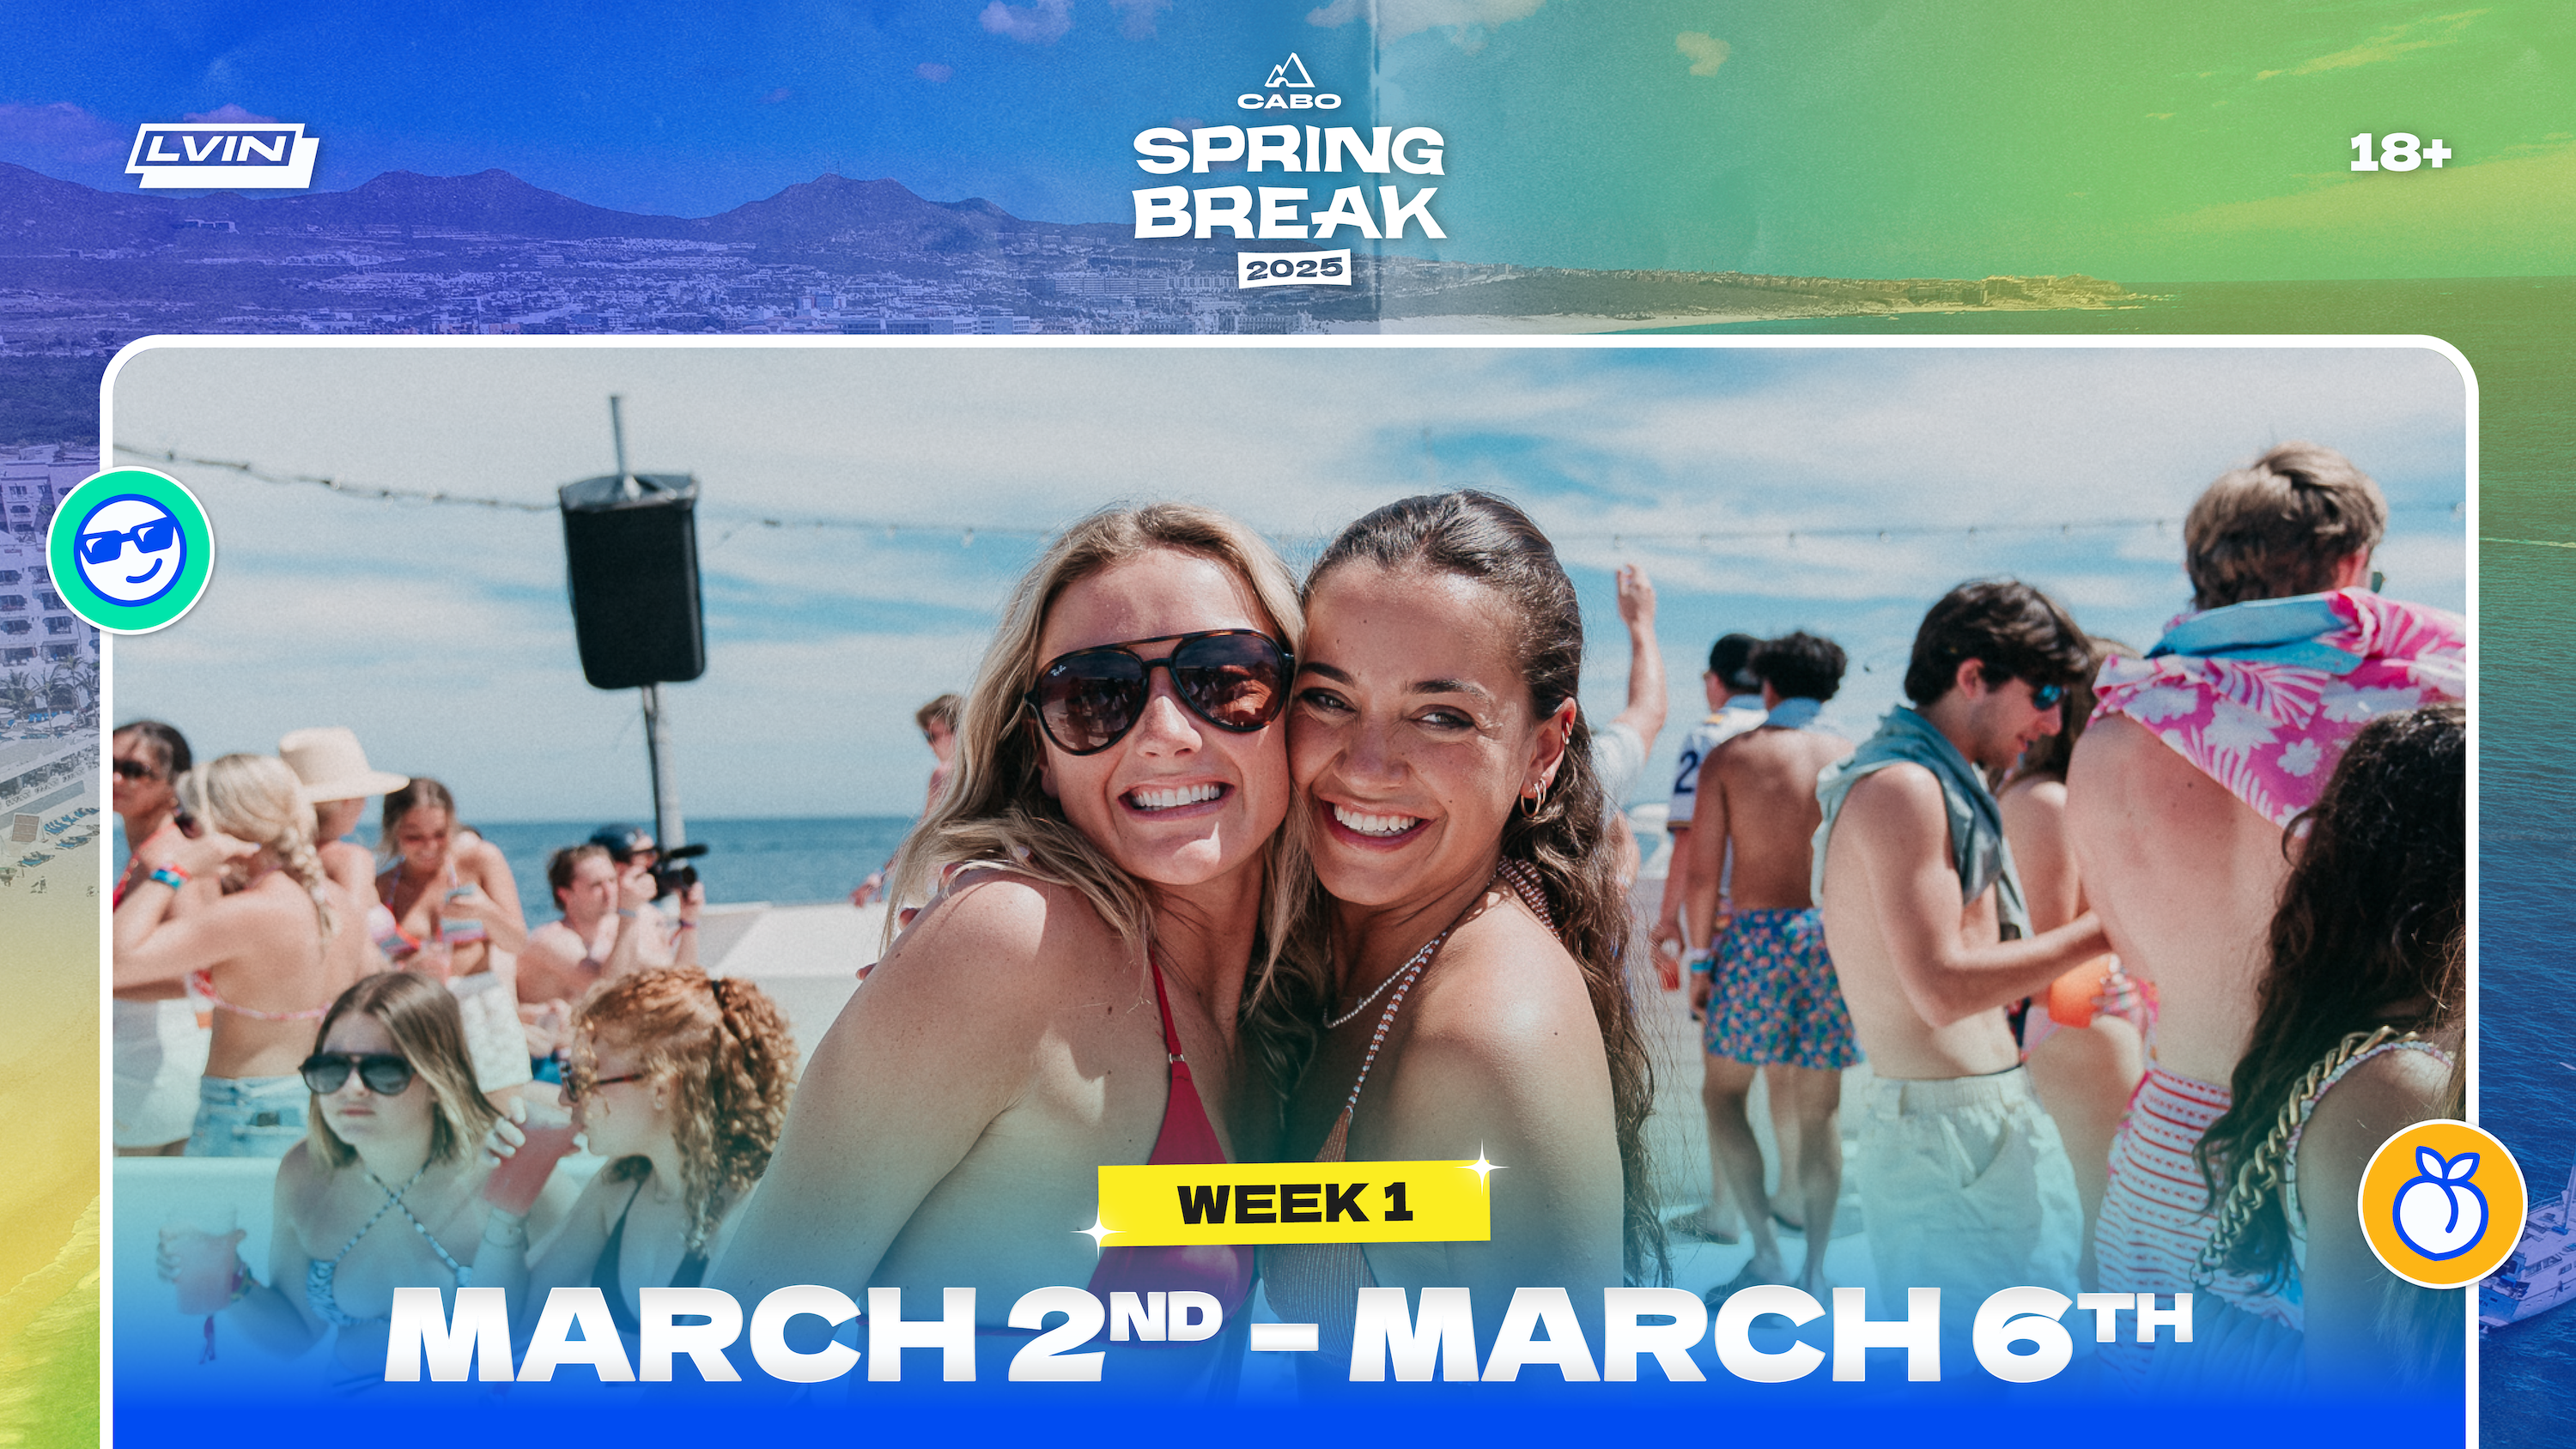 Cabo Spring Break 2025 Week 1 Header March 2 to March 6 LVIN